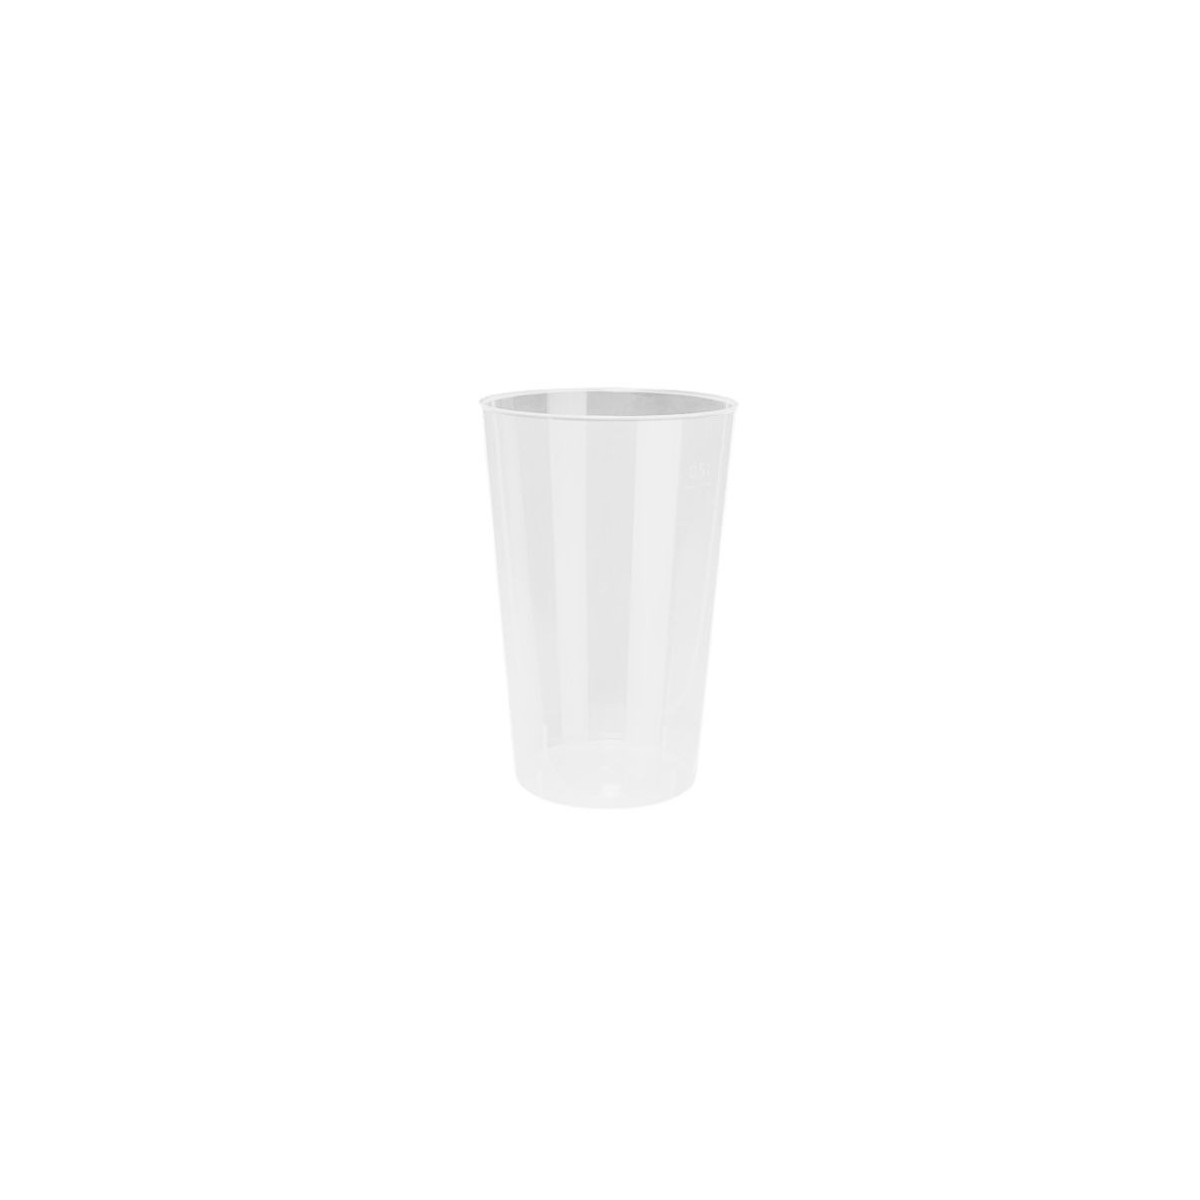 PP CLEAR REUSABLE DRINKING GLASS 9.1X14CM 500ML 30PCS